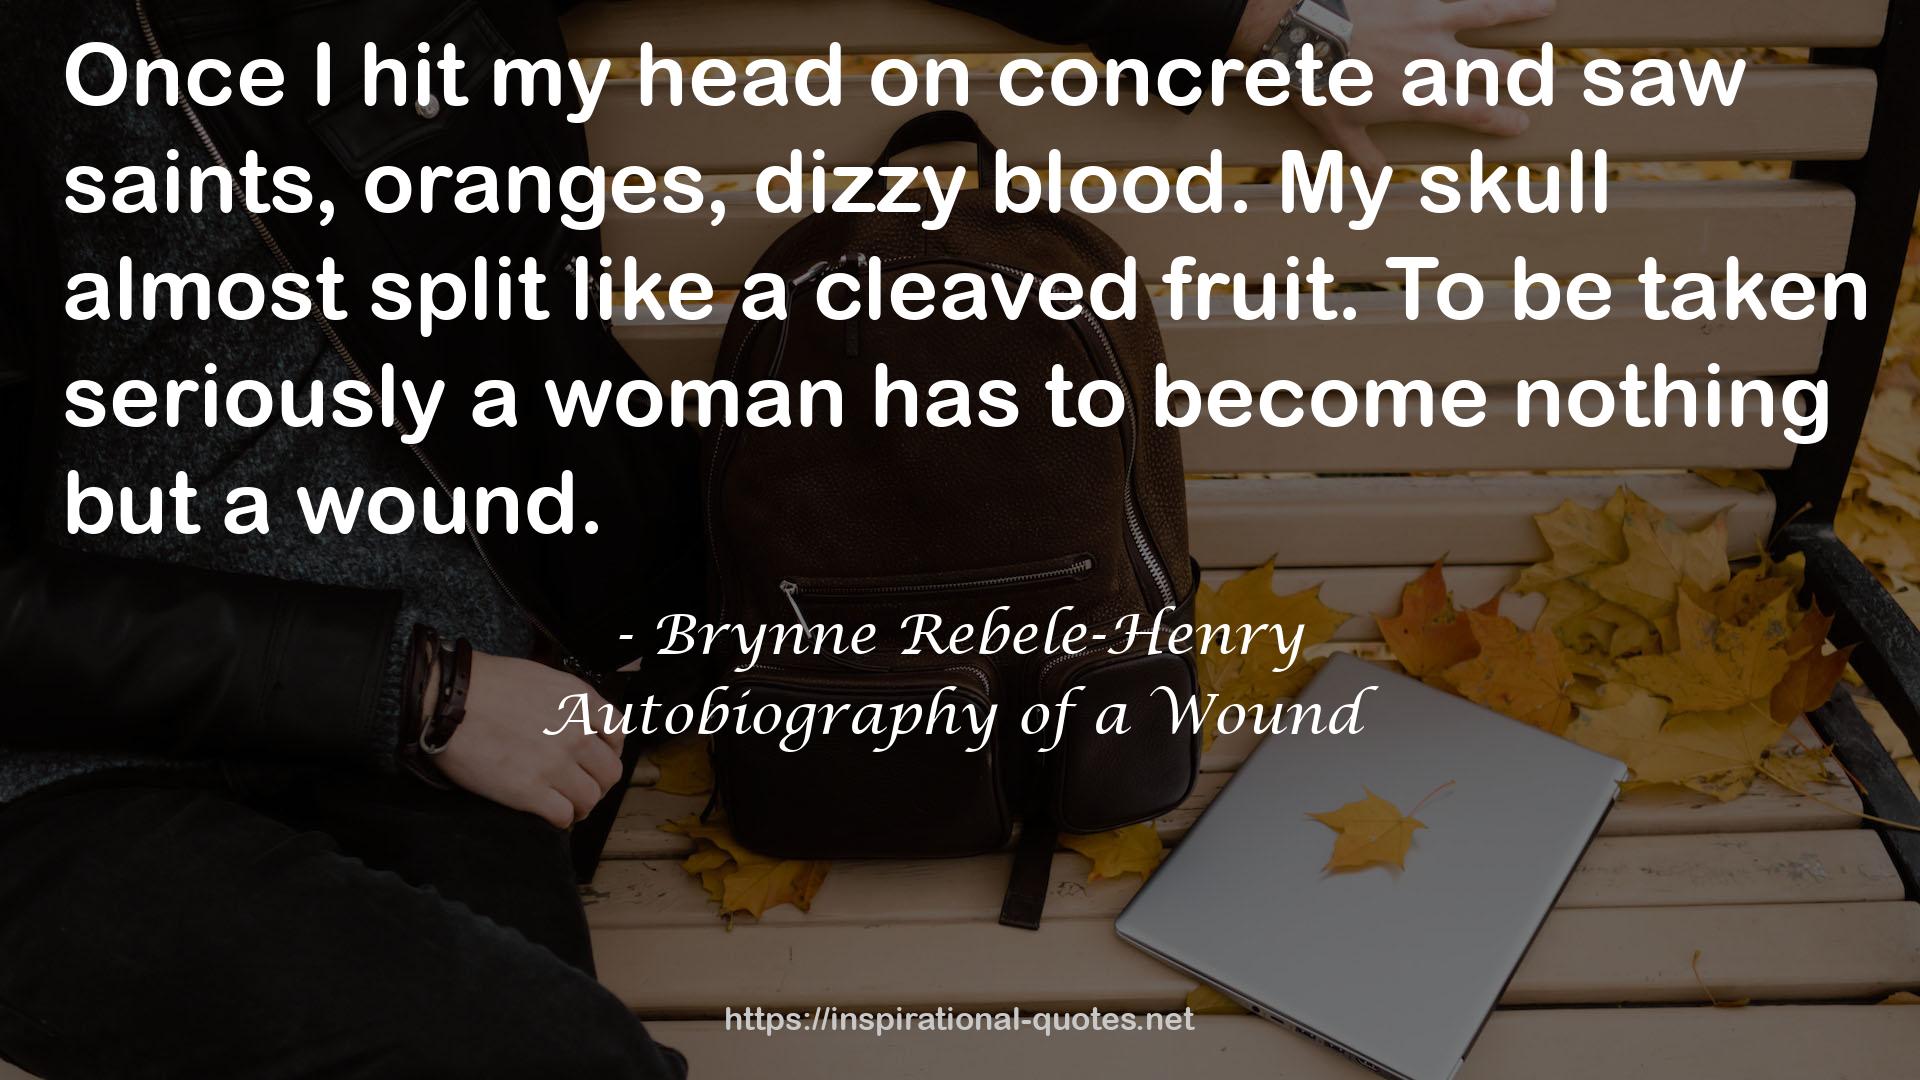 Autobiography of a Wound QUOTES